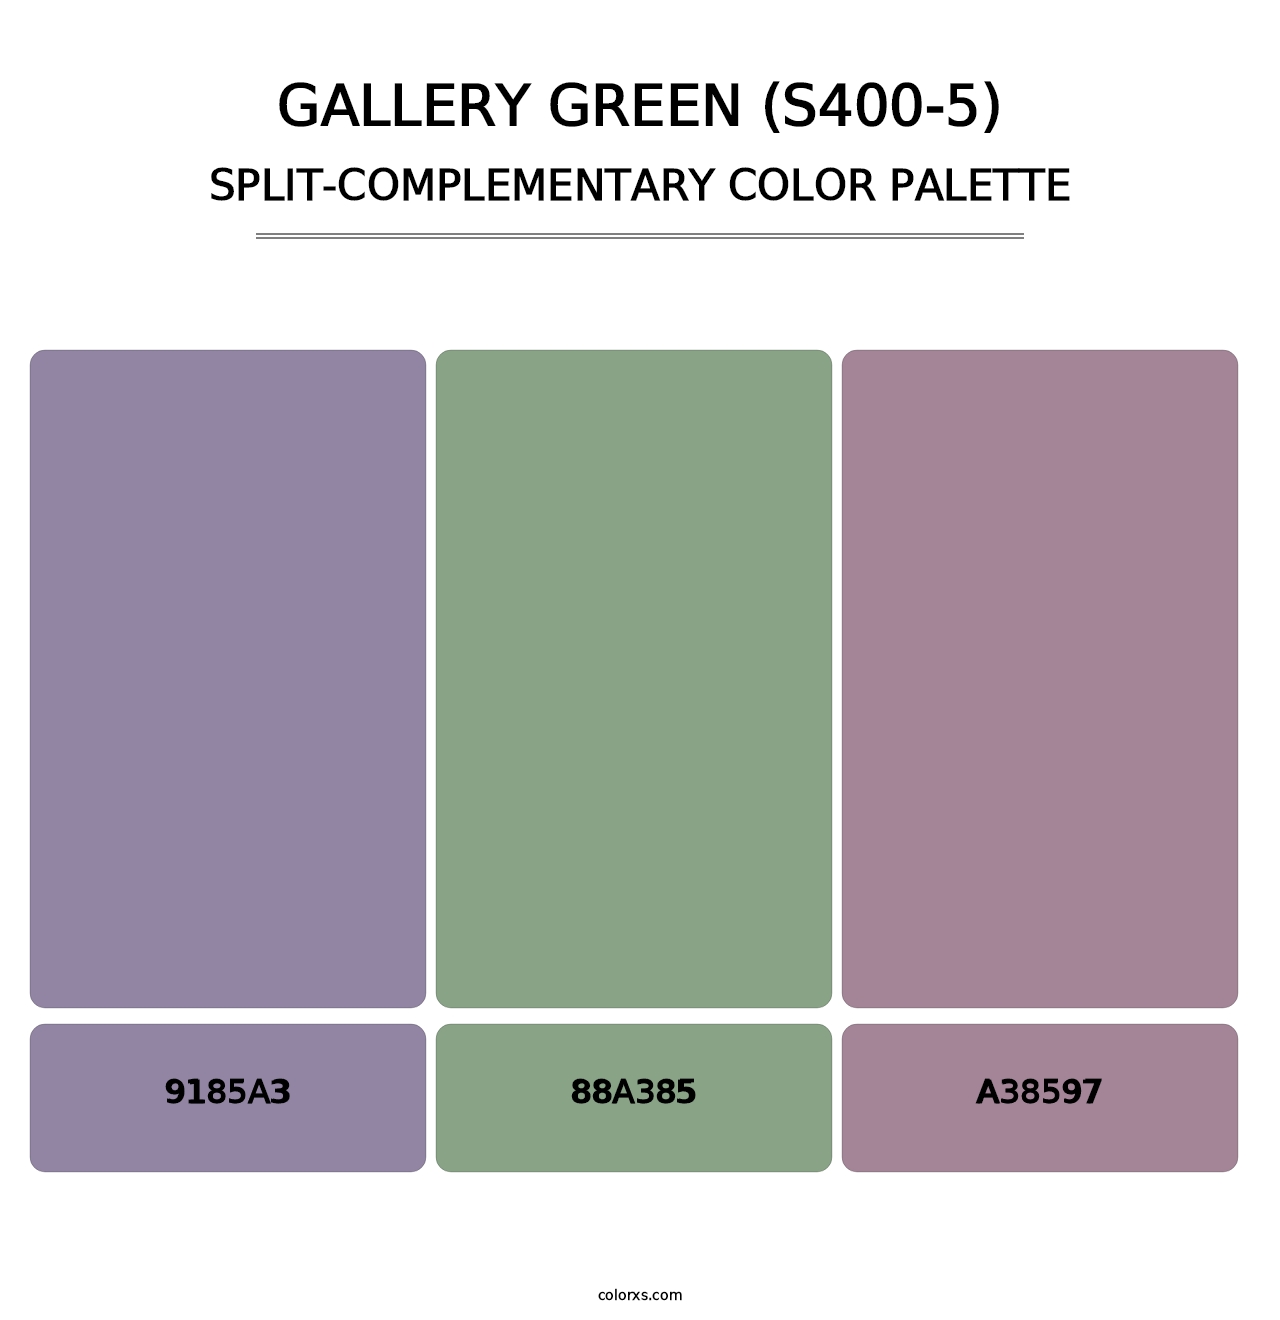 Gallery Green (S400-5) - Split-Complementary Color Palette